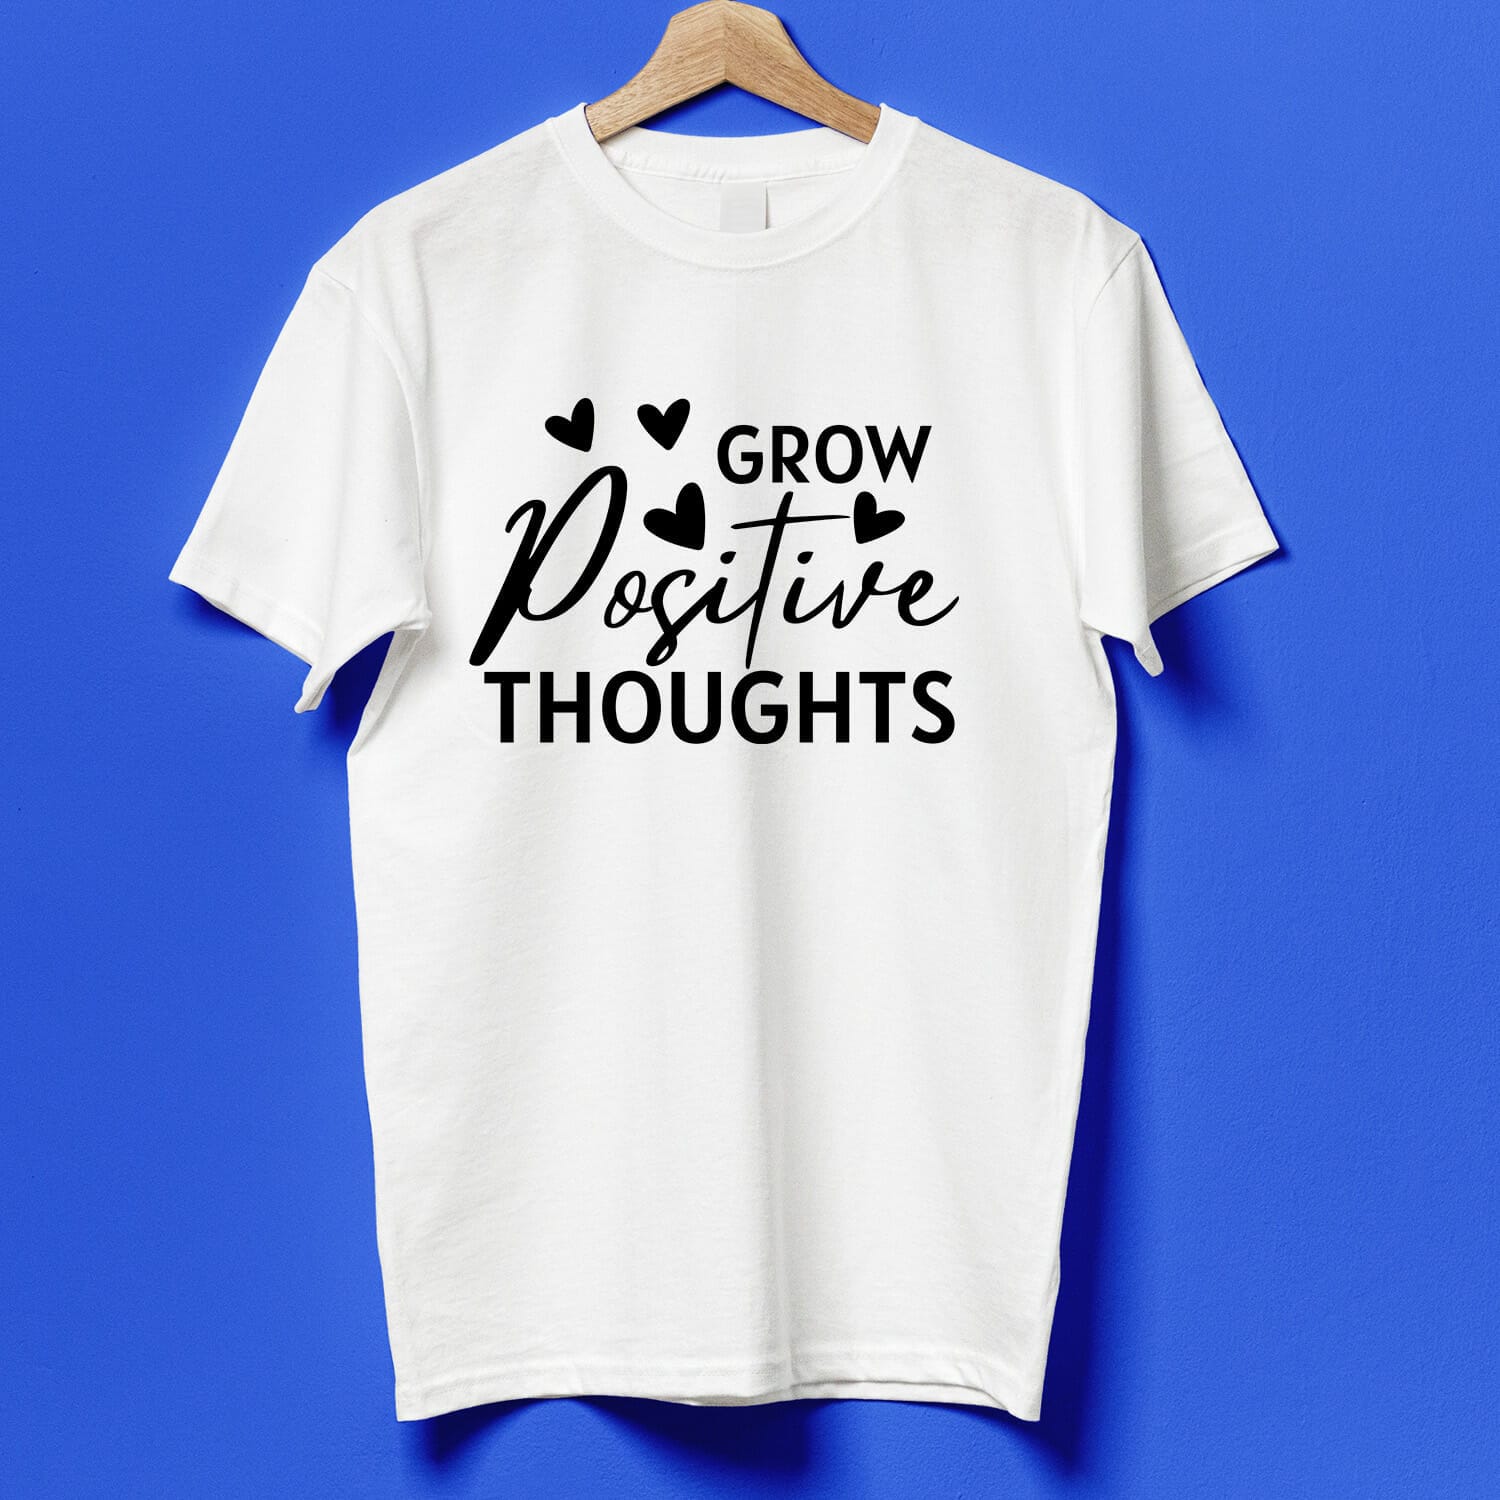 Inspirational Quote Grow Positive Thoughts T-shirt Design